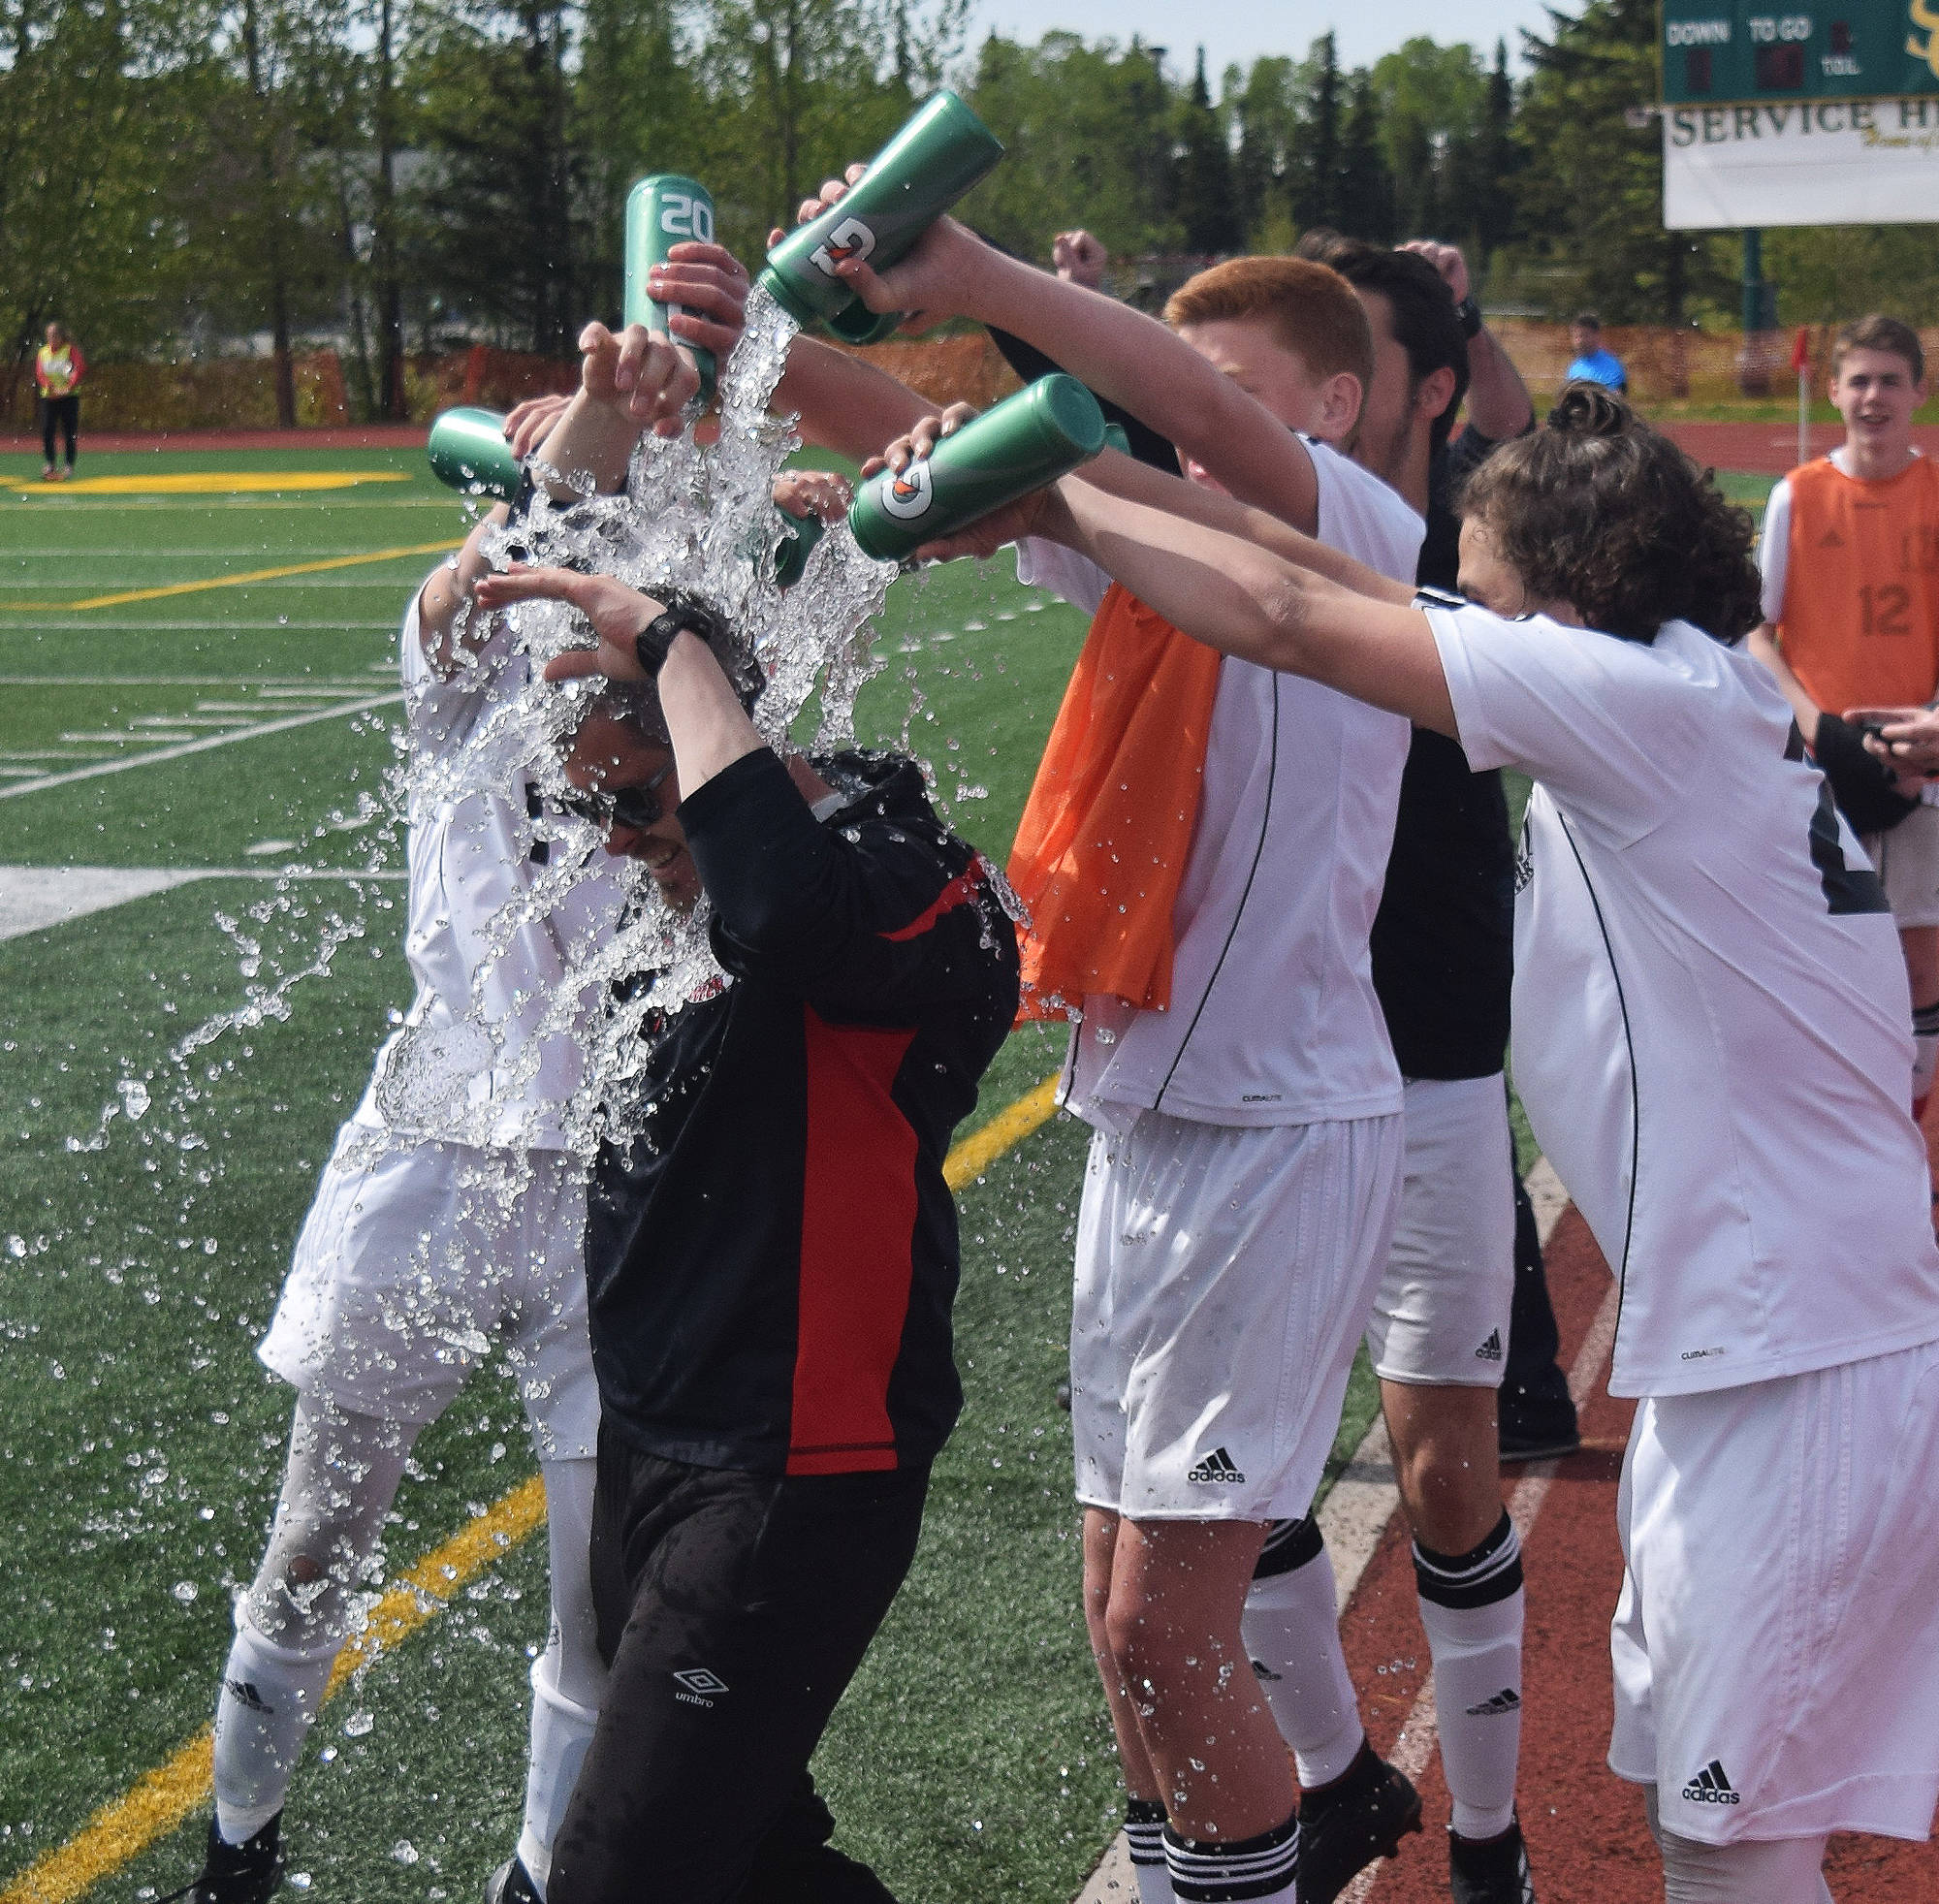 The Kenai Central boys celebrate winning the Division II state soccer championship by dousing head coach Joel Reemtsma in water Saturday afternoon at Service High School. (Photo by Joey Klecka/Peninsula Clarion)